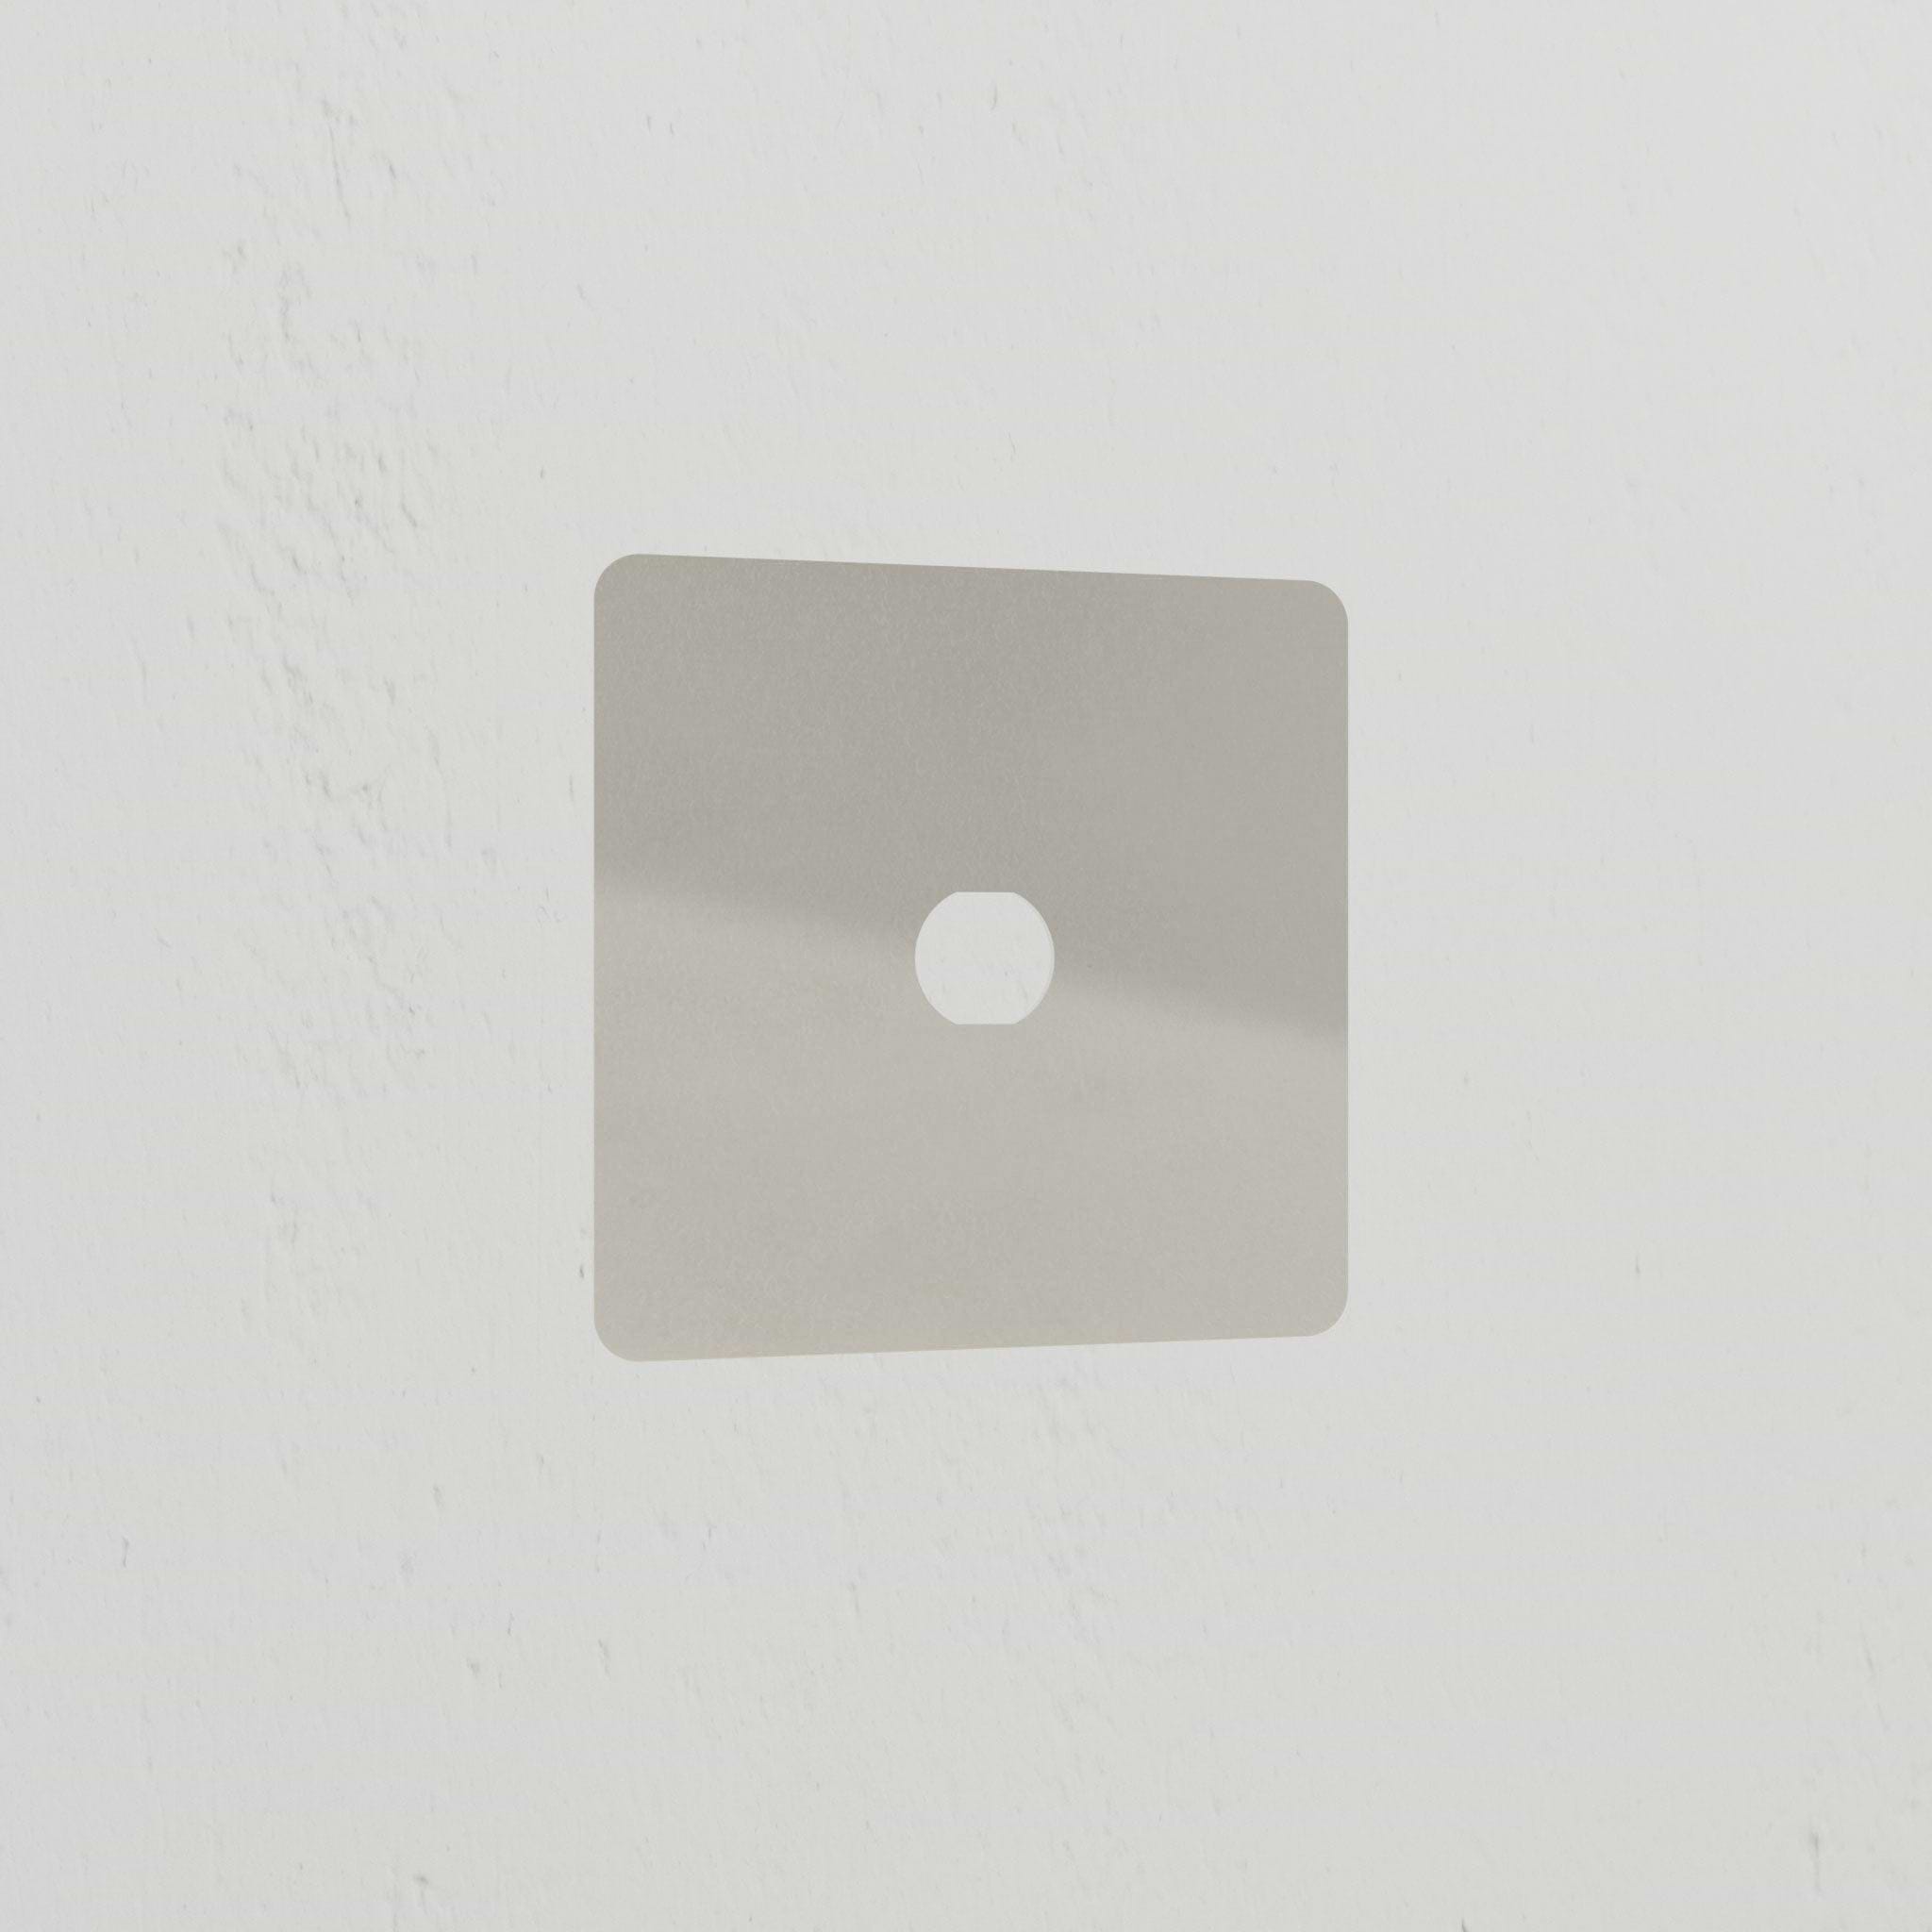 1G Switch Plate - Polished Nickel